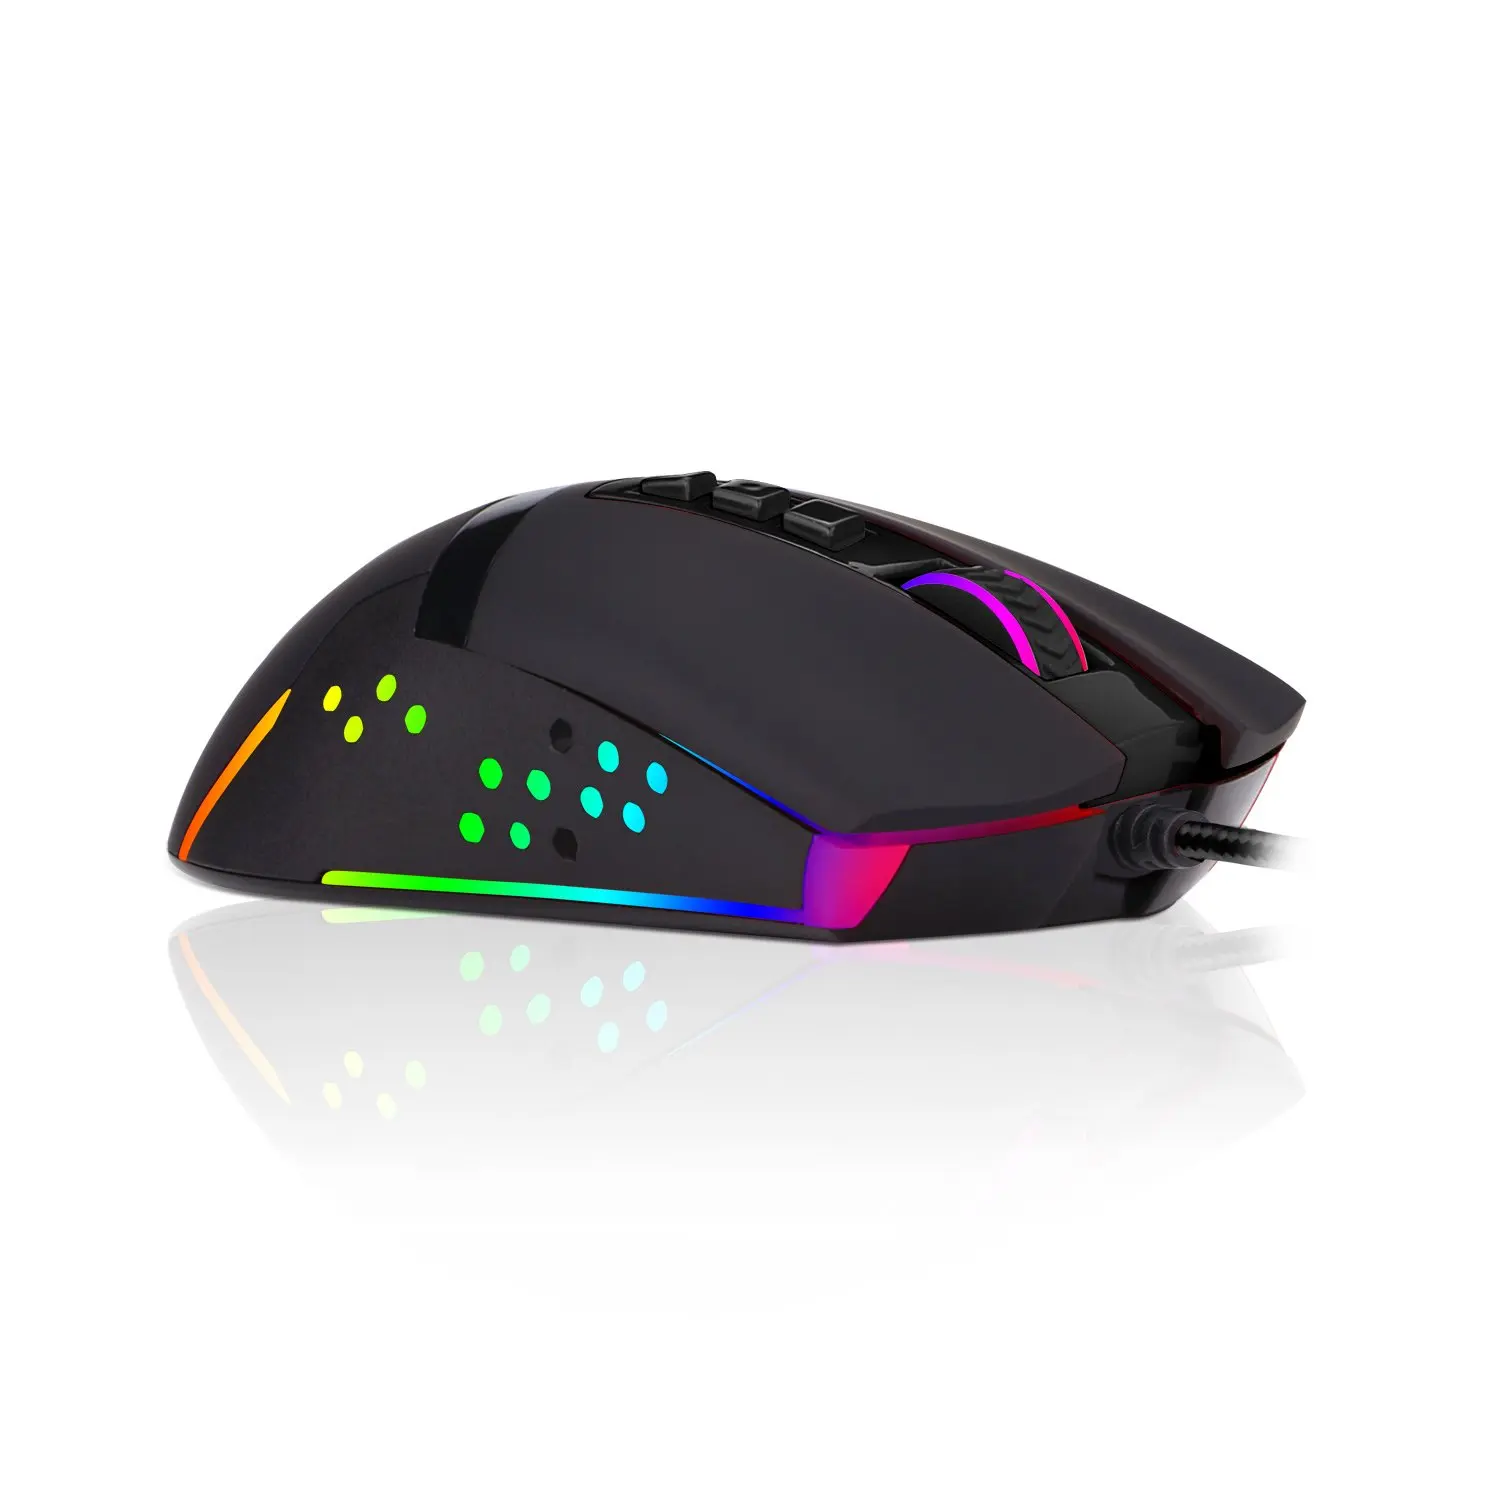 Hot Product Red Dragon M712 USB RGB Backllit Mouse Gamer